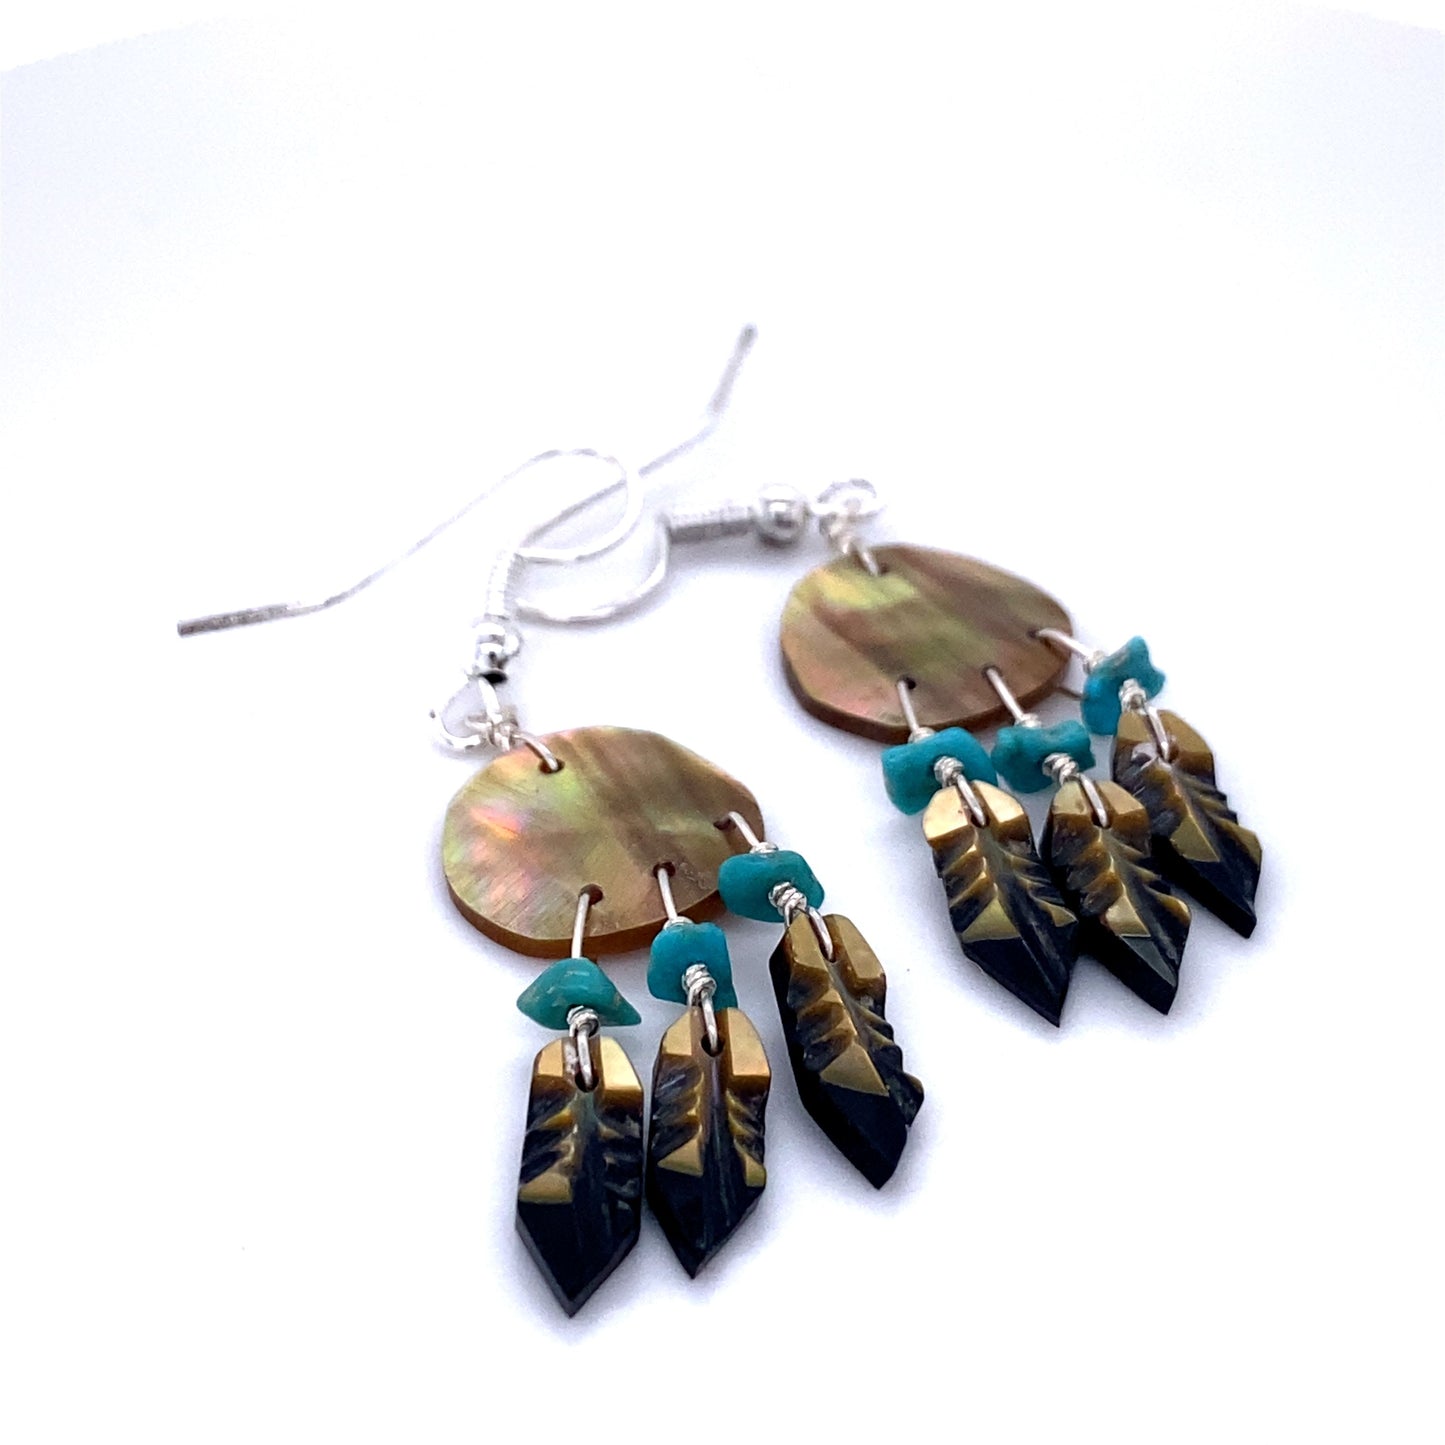 
                  
                    Super Silver's Artisan-made earrings with turquoise and black natural stone beads, inspired by Native American culture are replaced with Super Silver's Handmade Earrings with 3 Small Stone Feathers.
                  
                